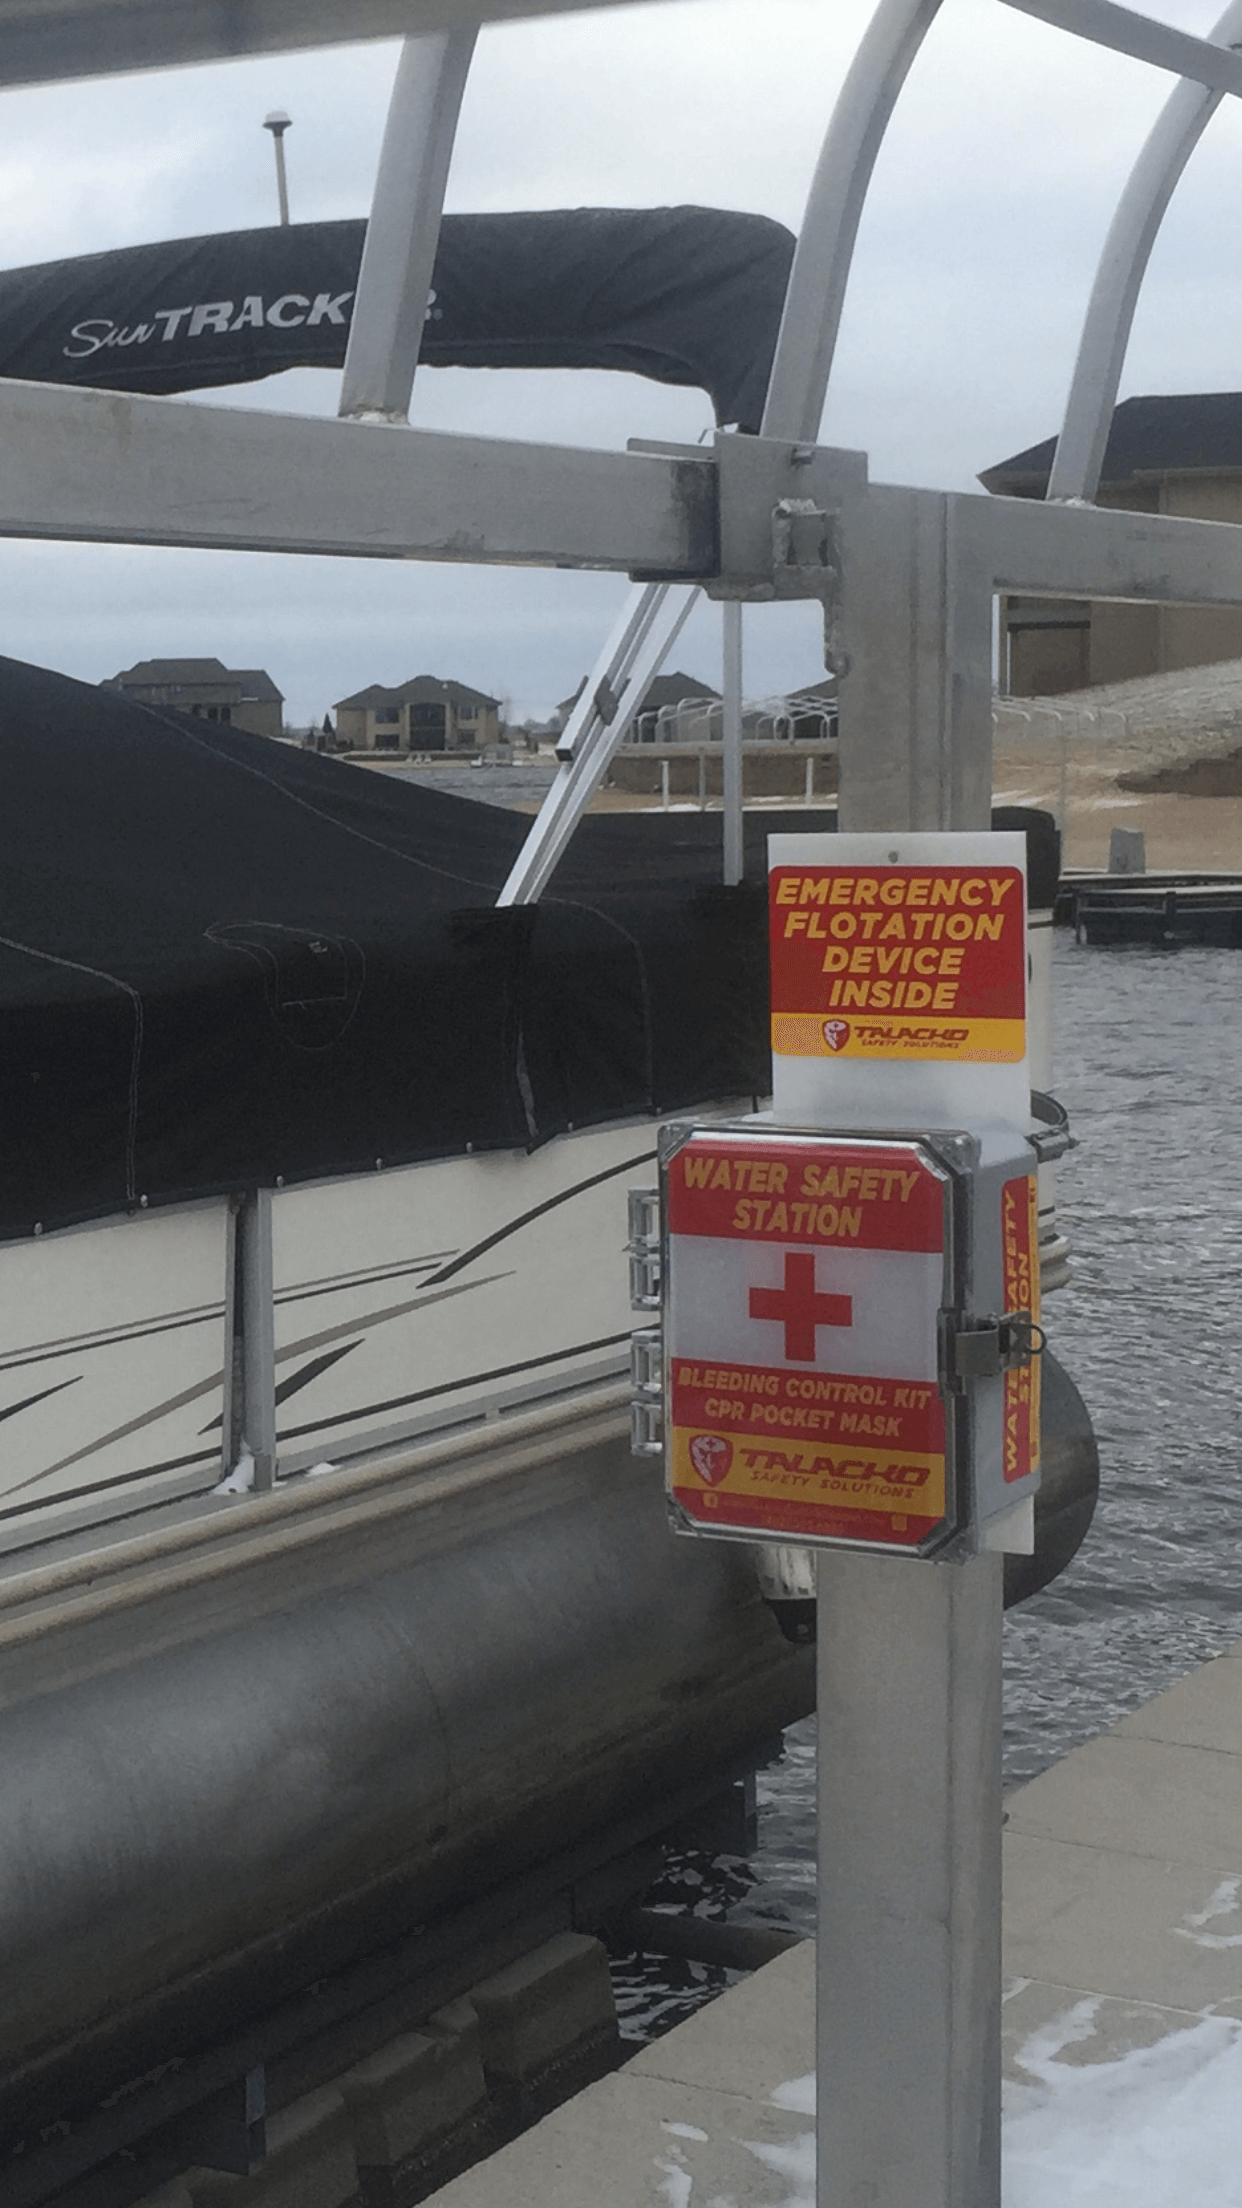 Water Safety Station Designed to be placed on boat docks, pools, and bodies of water.